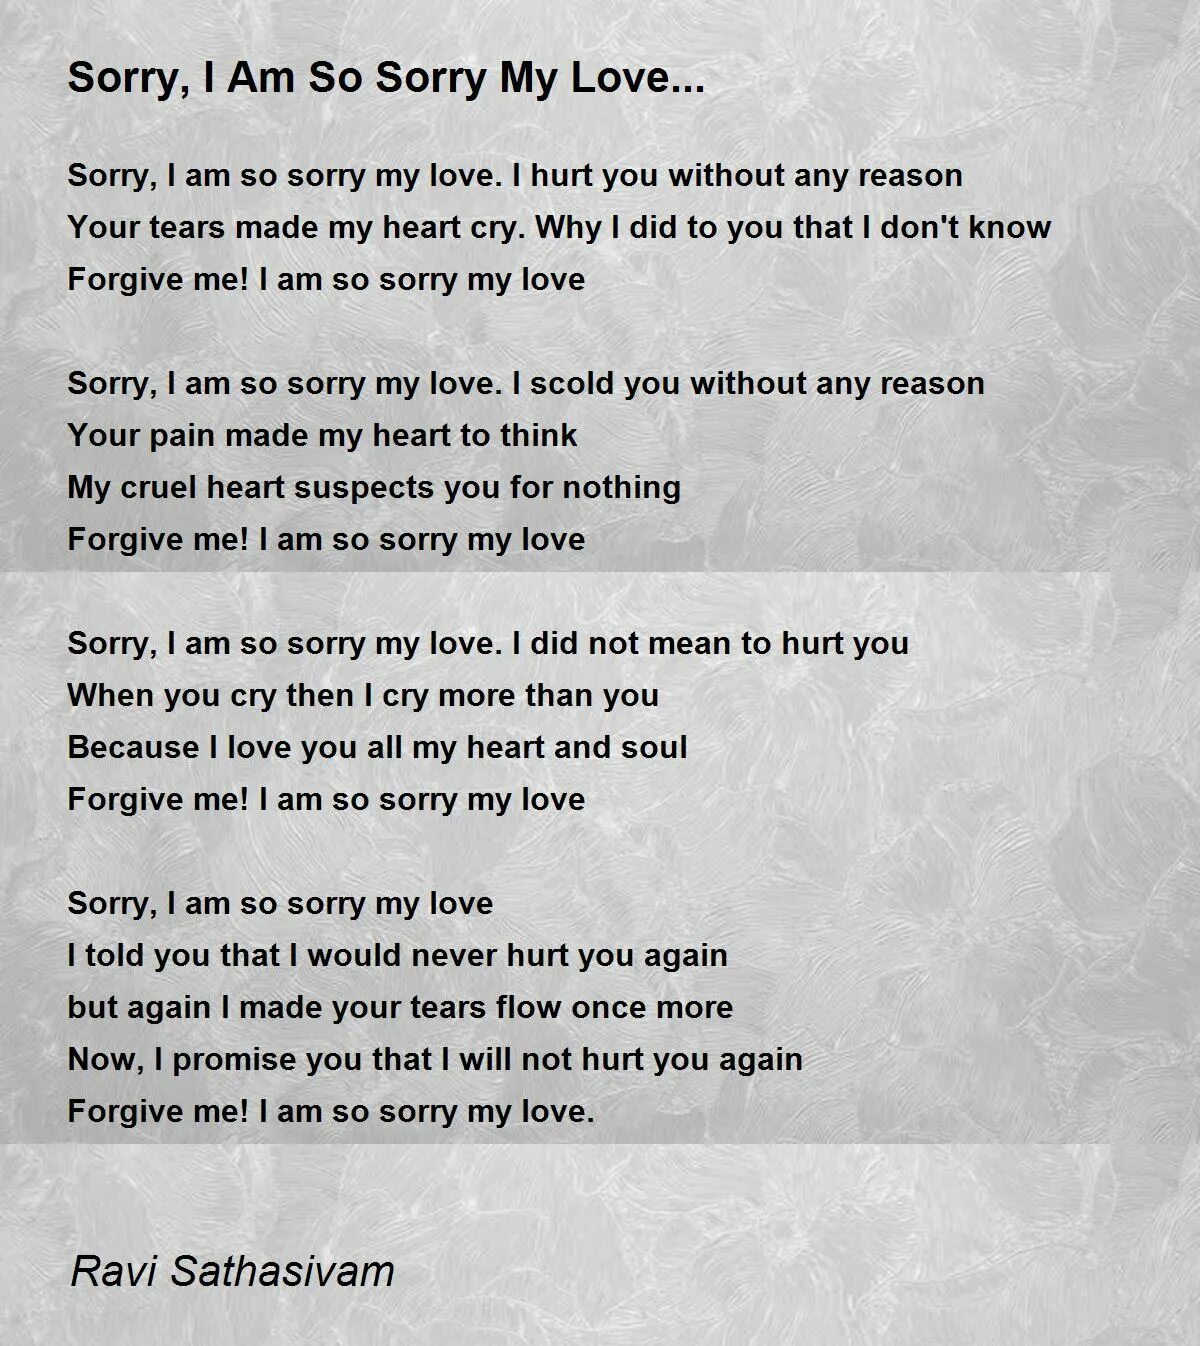 Sorry i Love you текст. Sorry i Love you перевод. Перевод песни sorry i Love you. Poetry apologies.